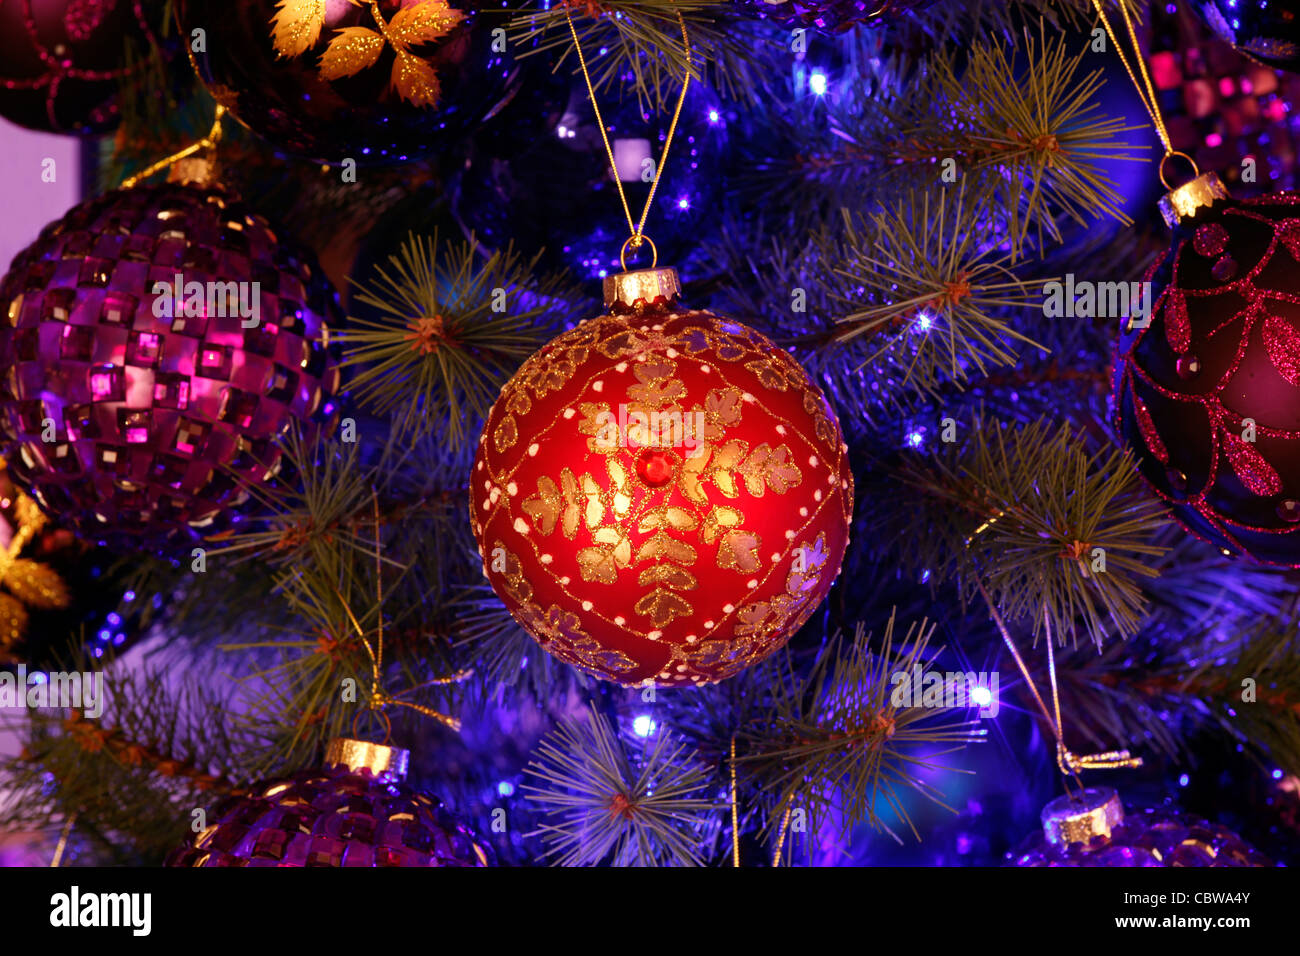 Baubles hanging on a Christmas tree Stock Photo